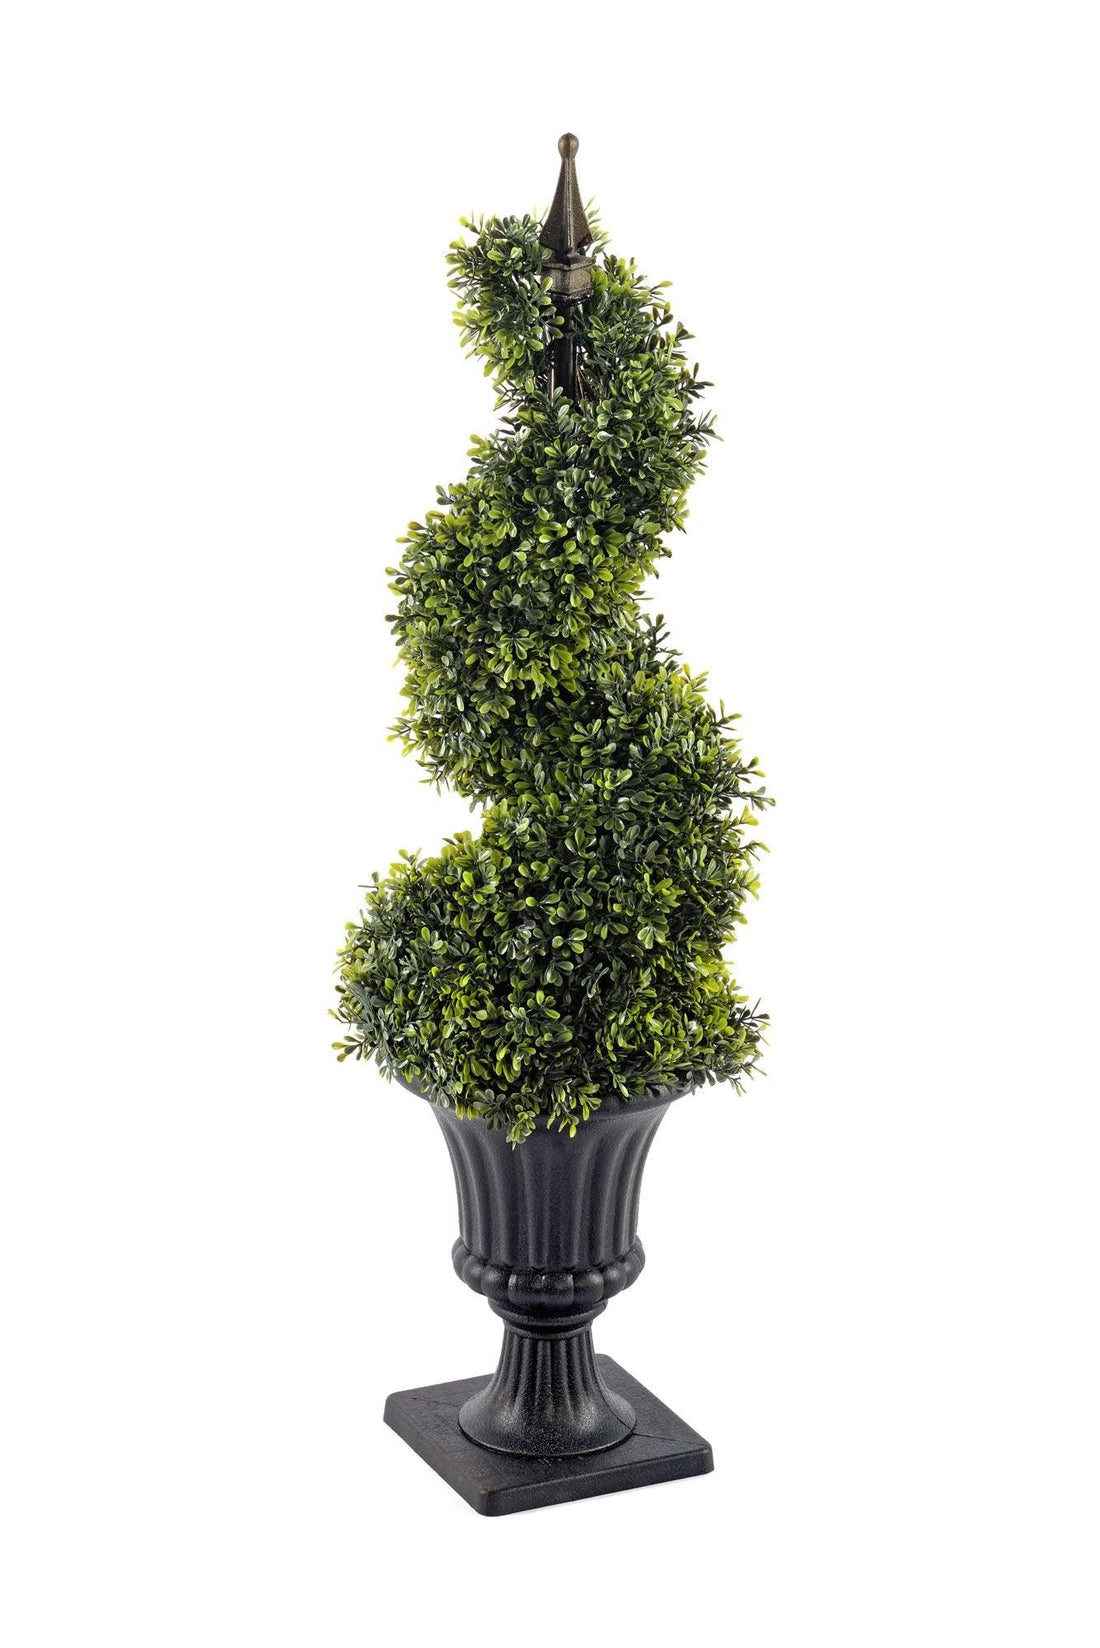 Boxwood Spiral Topiary with Pot 90cm - £207.99 - Artificial Plants 